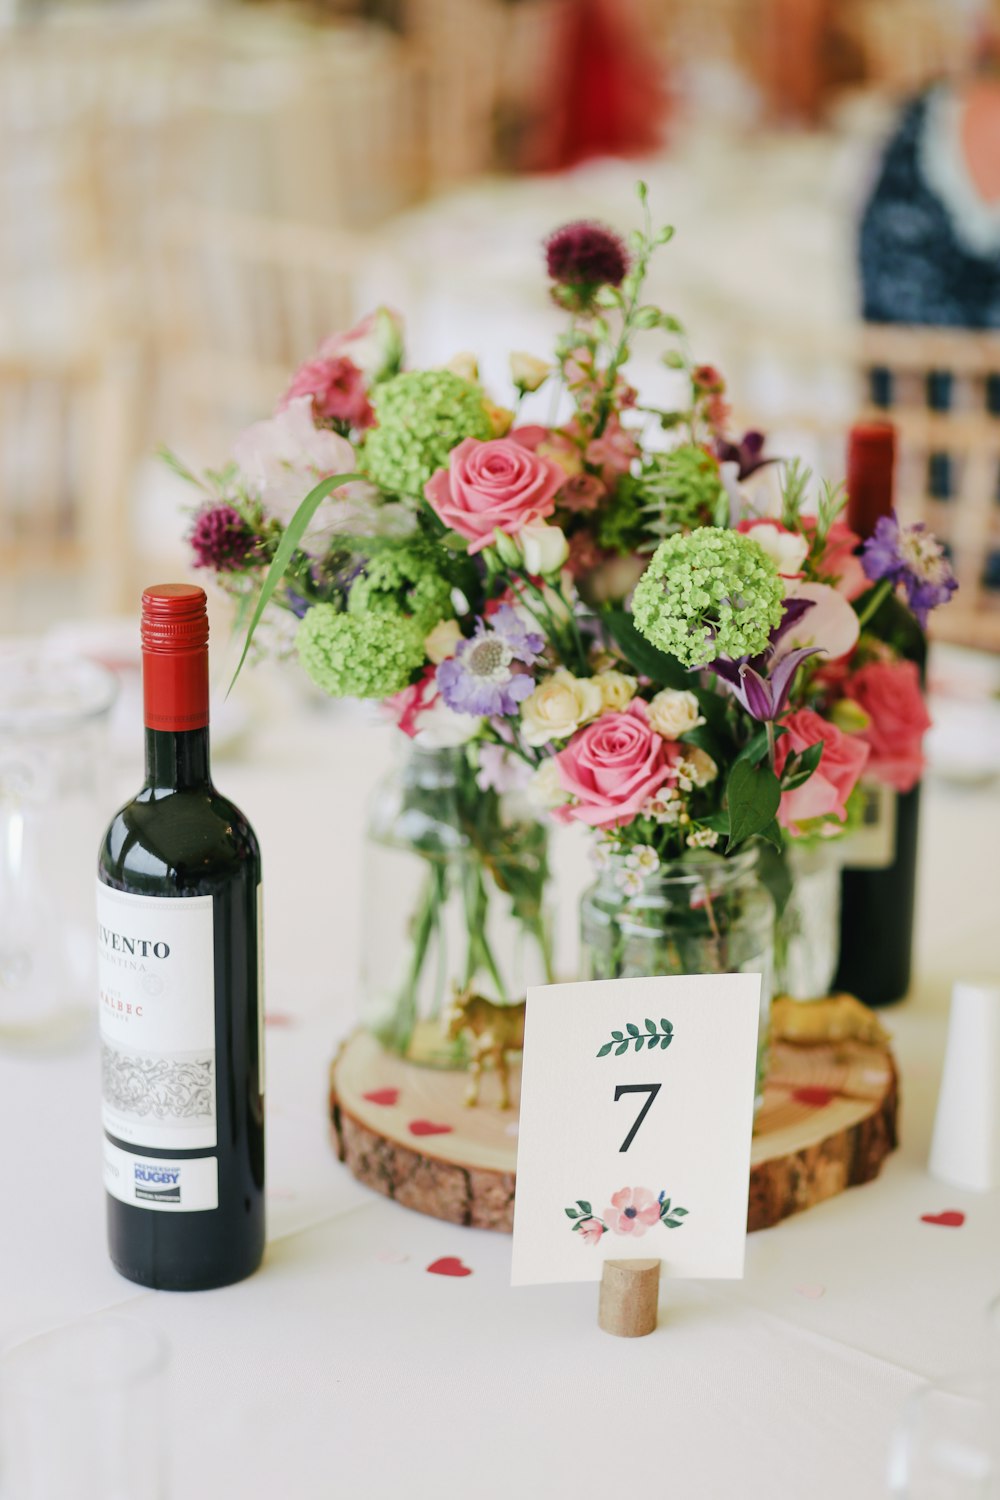 flower arrangement with wine bottle on the table